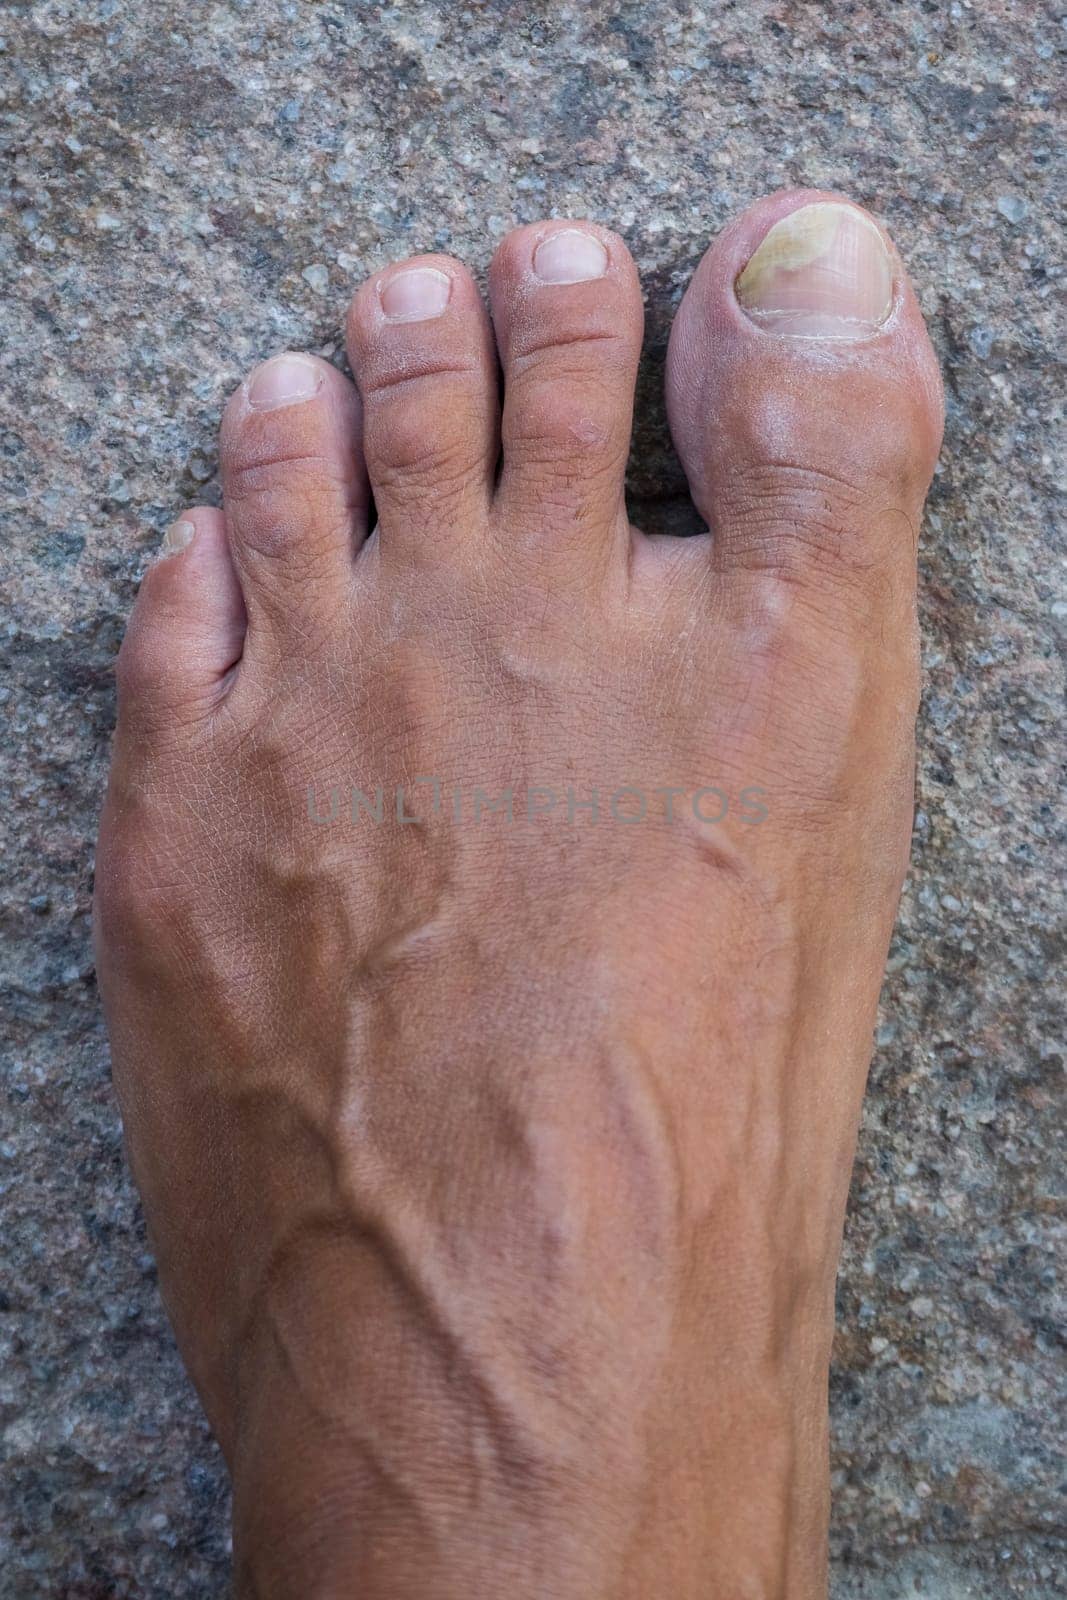 Toenails with fungus problems,Onychomycosis, also known as tinea unguium, is a fungal infection of the nail, stone background.